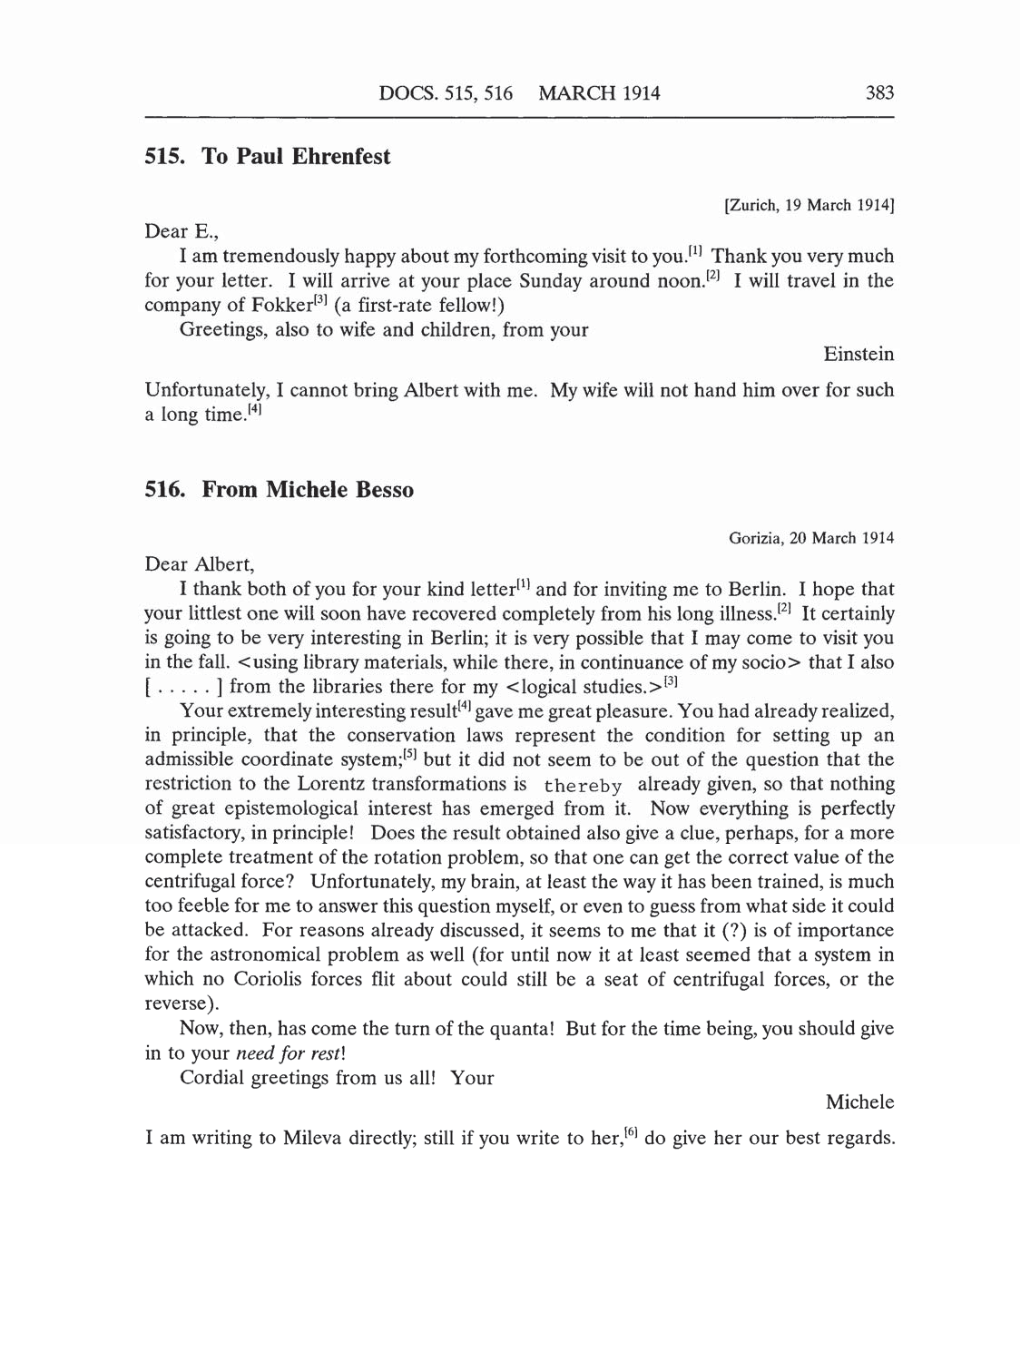 Volume 5: The Swiss Years: Correspondence, 1902-1914 (English translation supplement) page 383